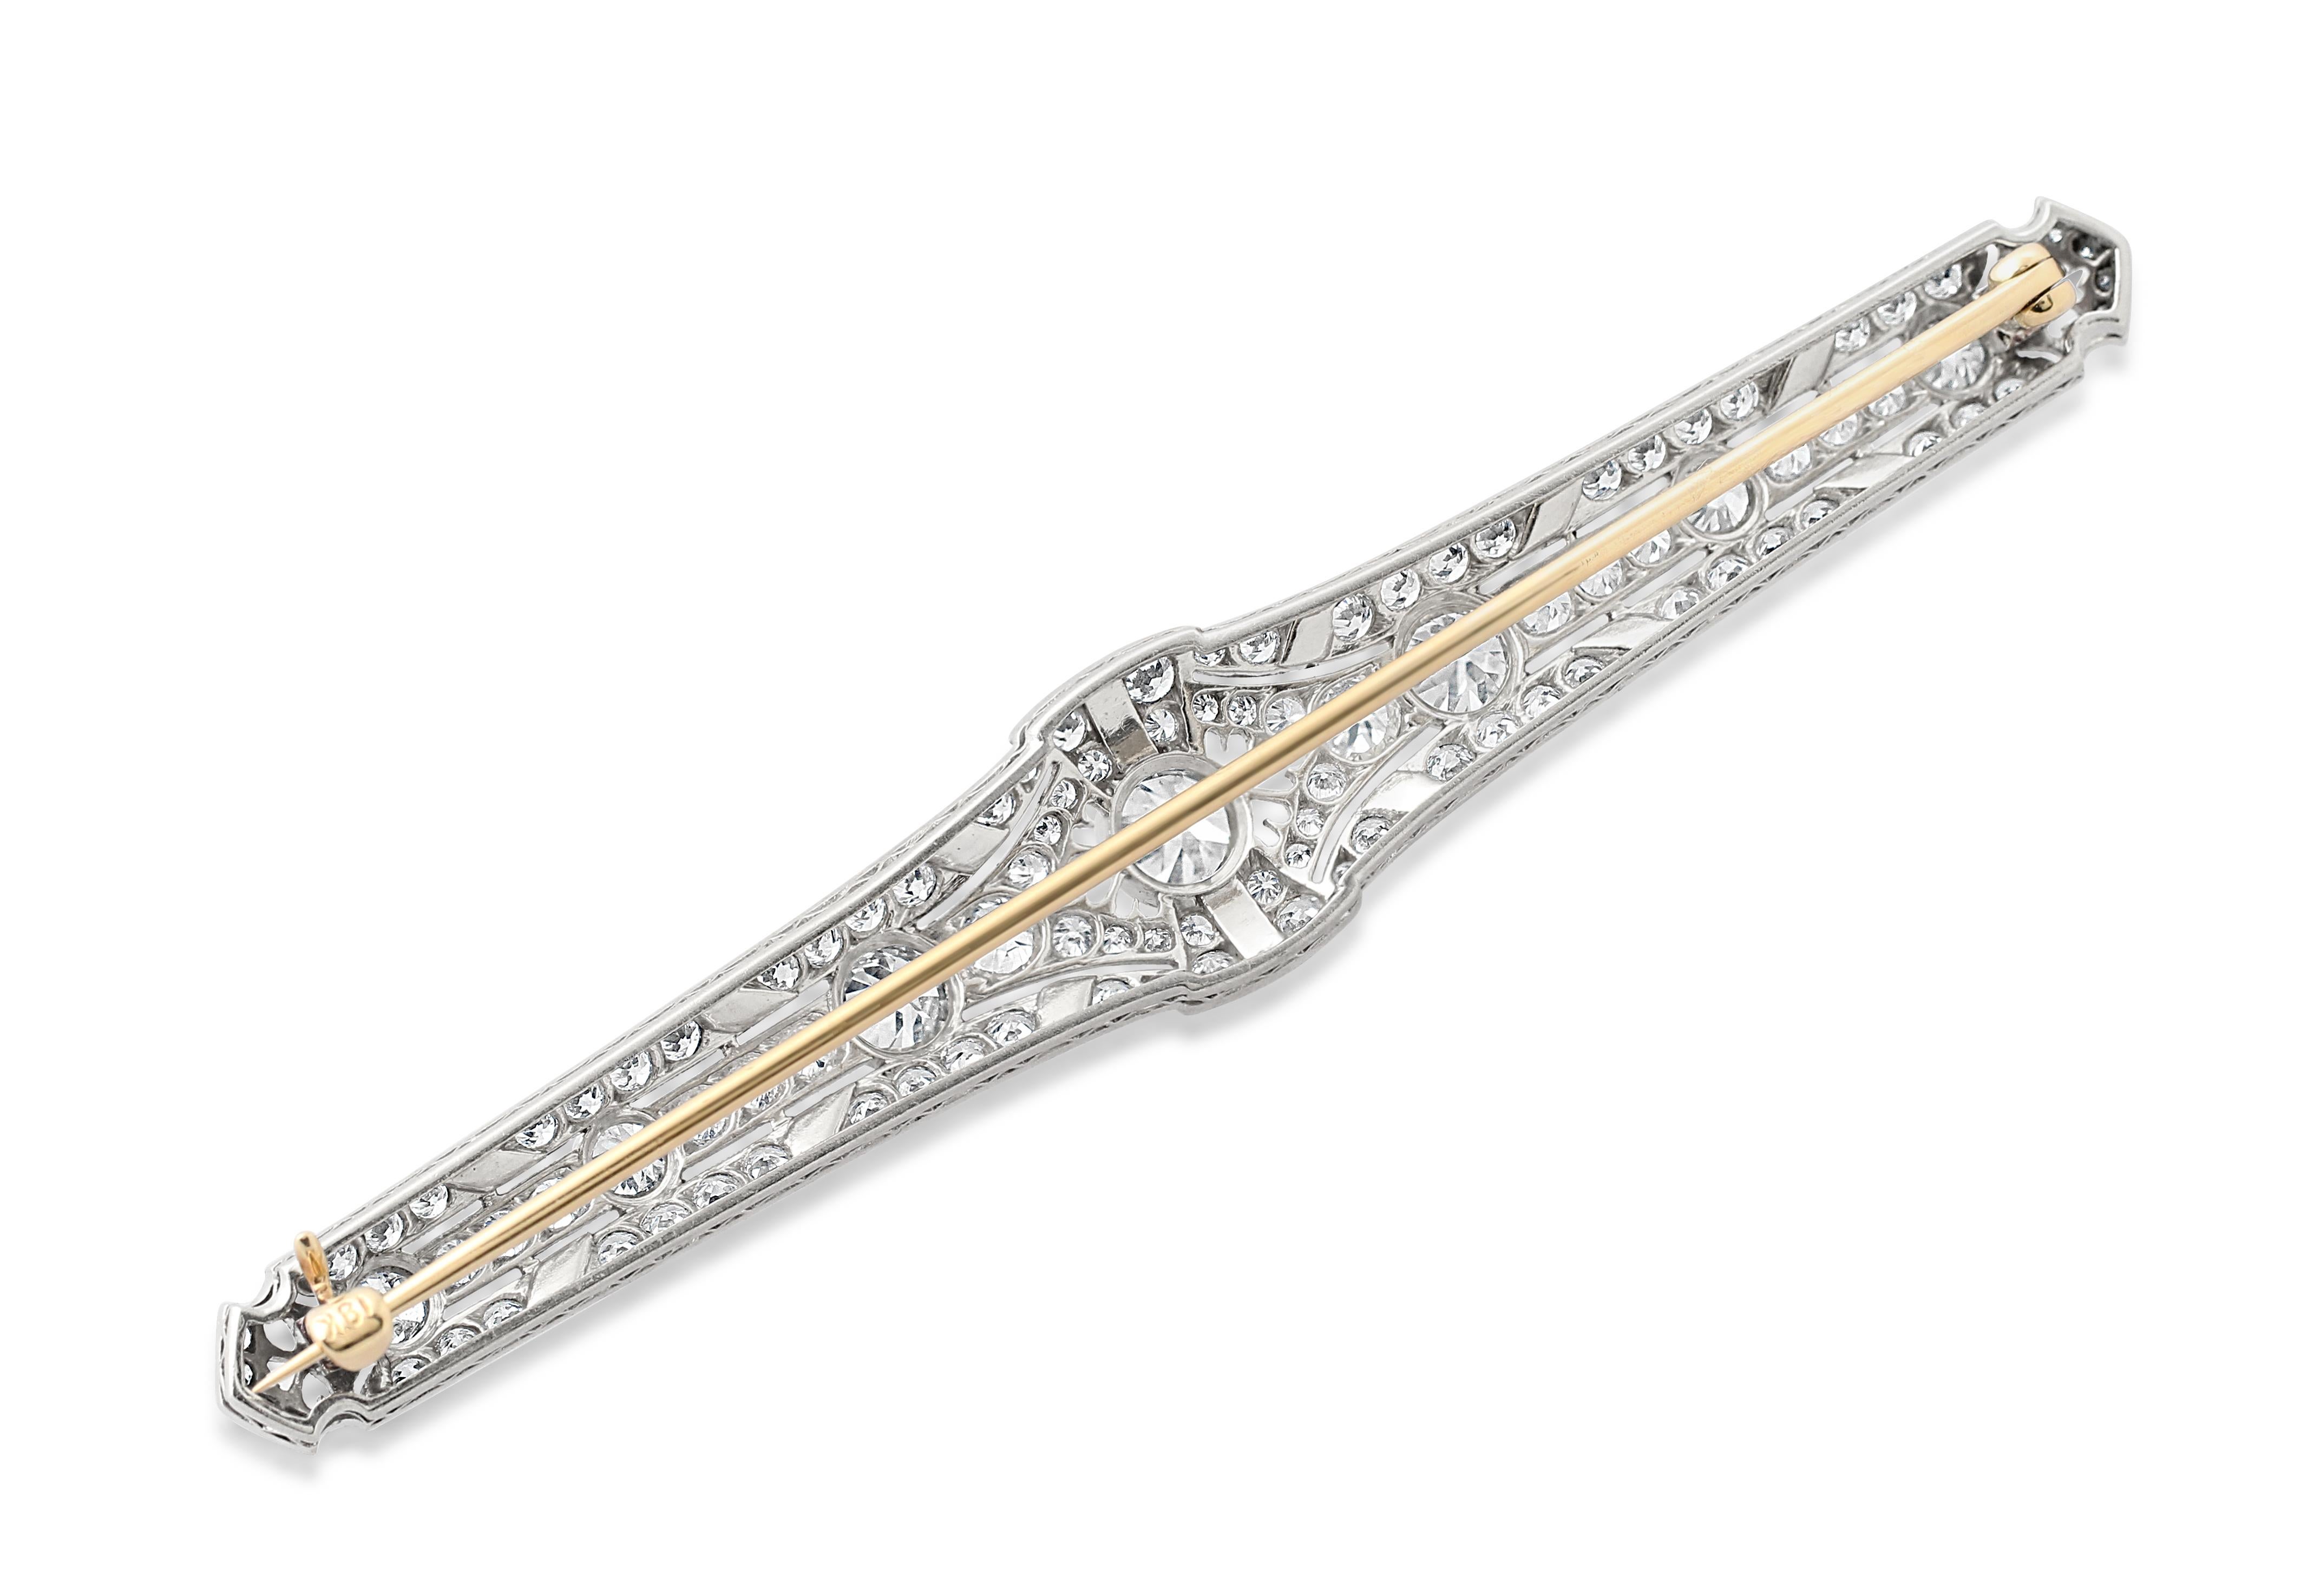 An Art Deco platinum, diamond and onyx bar brooch. Set with approximately 2.80 carats of diamonds and an 18k gold pin. Length = 8.5cm. Weight = 12.85gr.